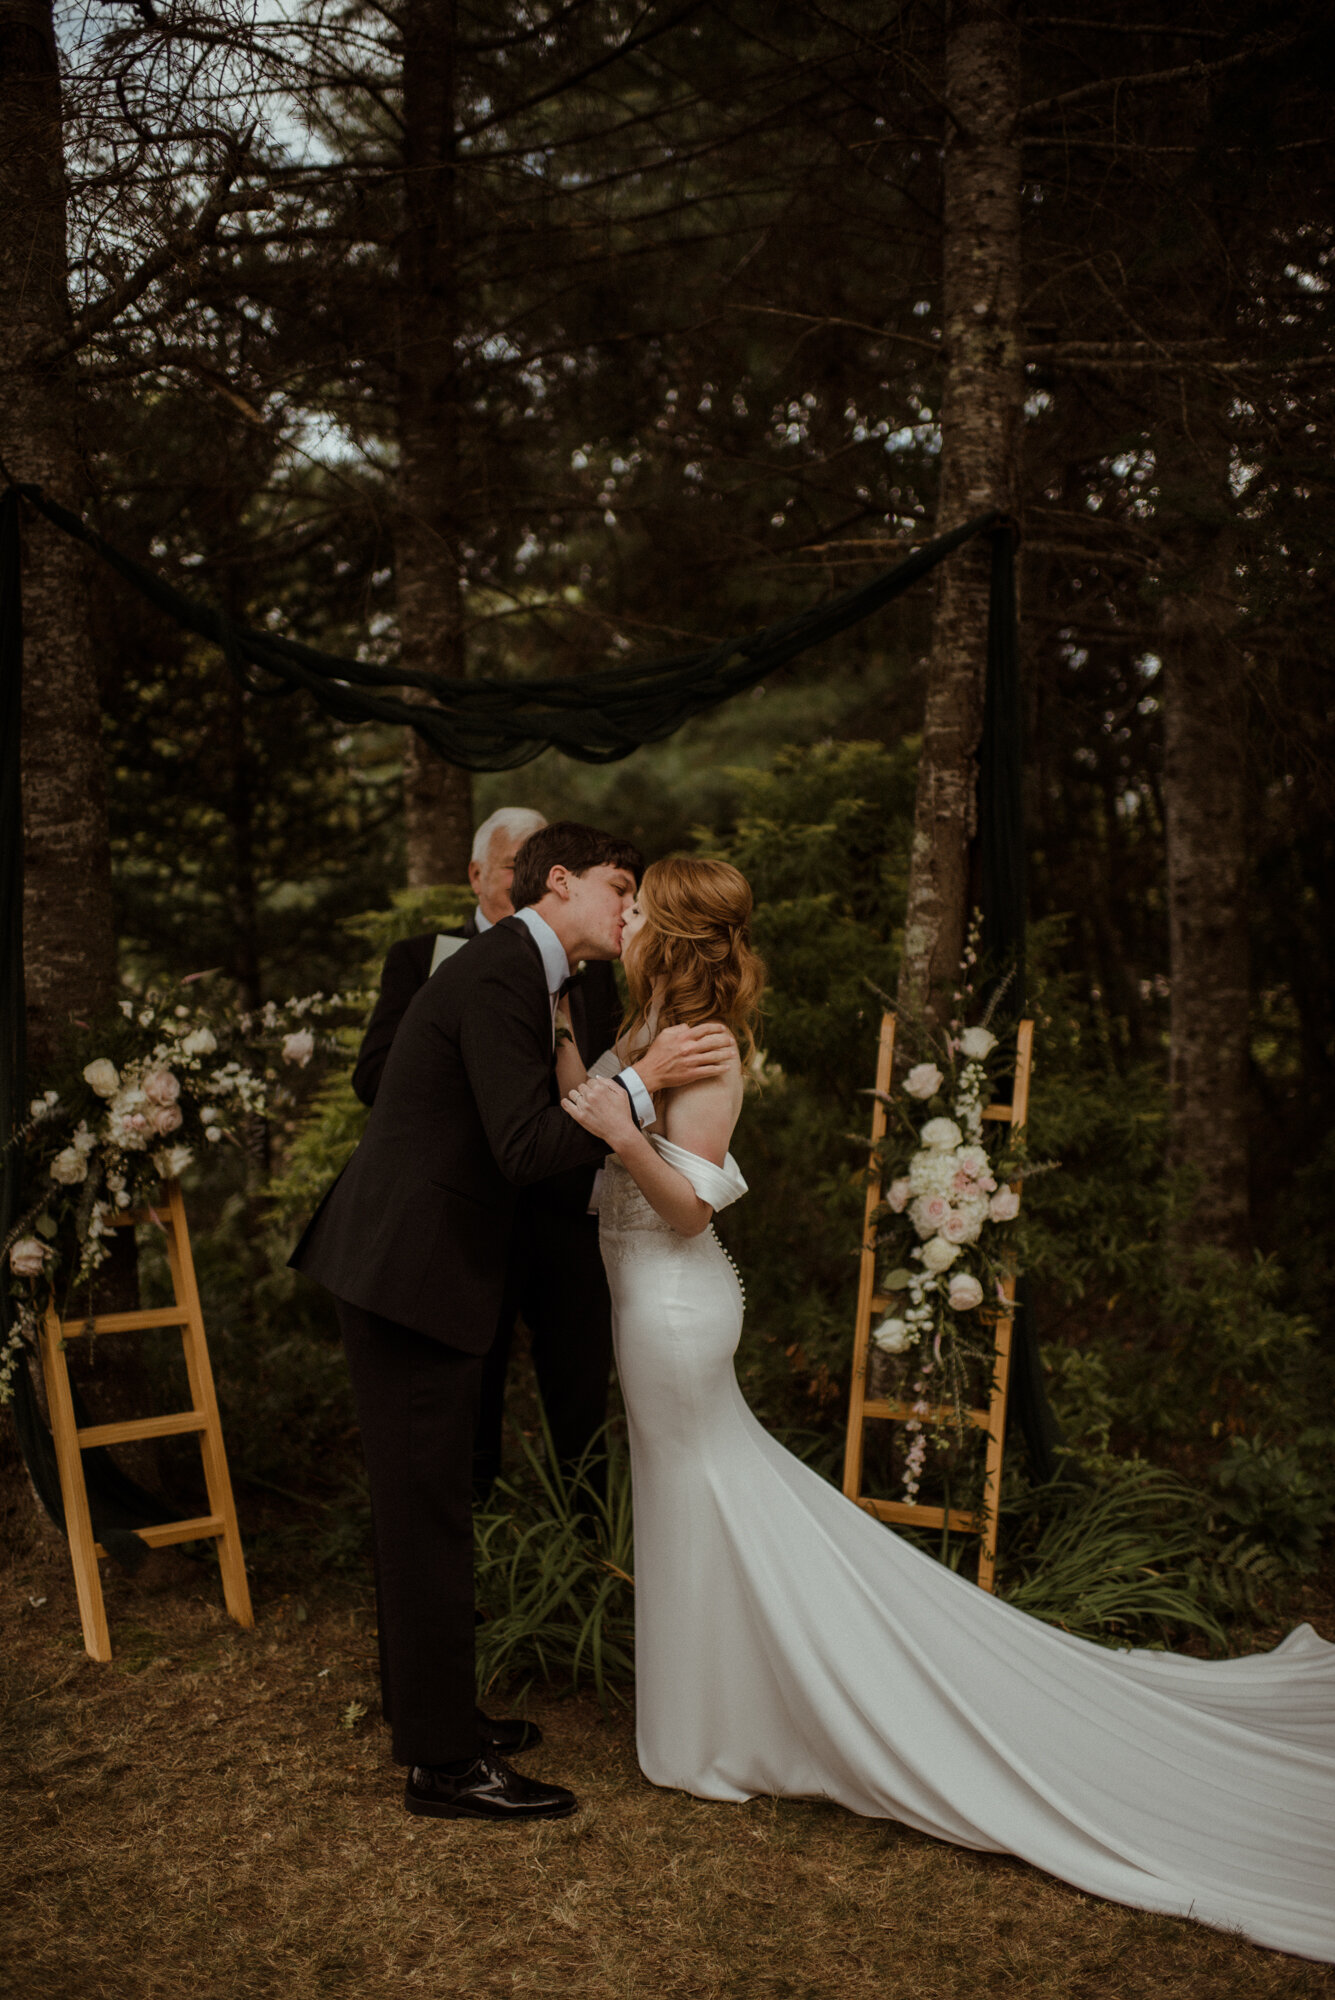 Autumn Elopement in New Hampshire - Backyard Wedding during COVID and Sunrise Hike in Wedding Dress - White Sails Creative_57.jpg